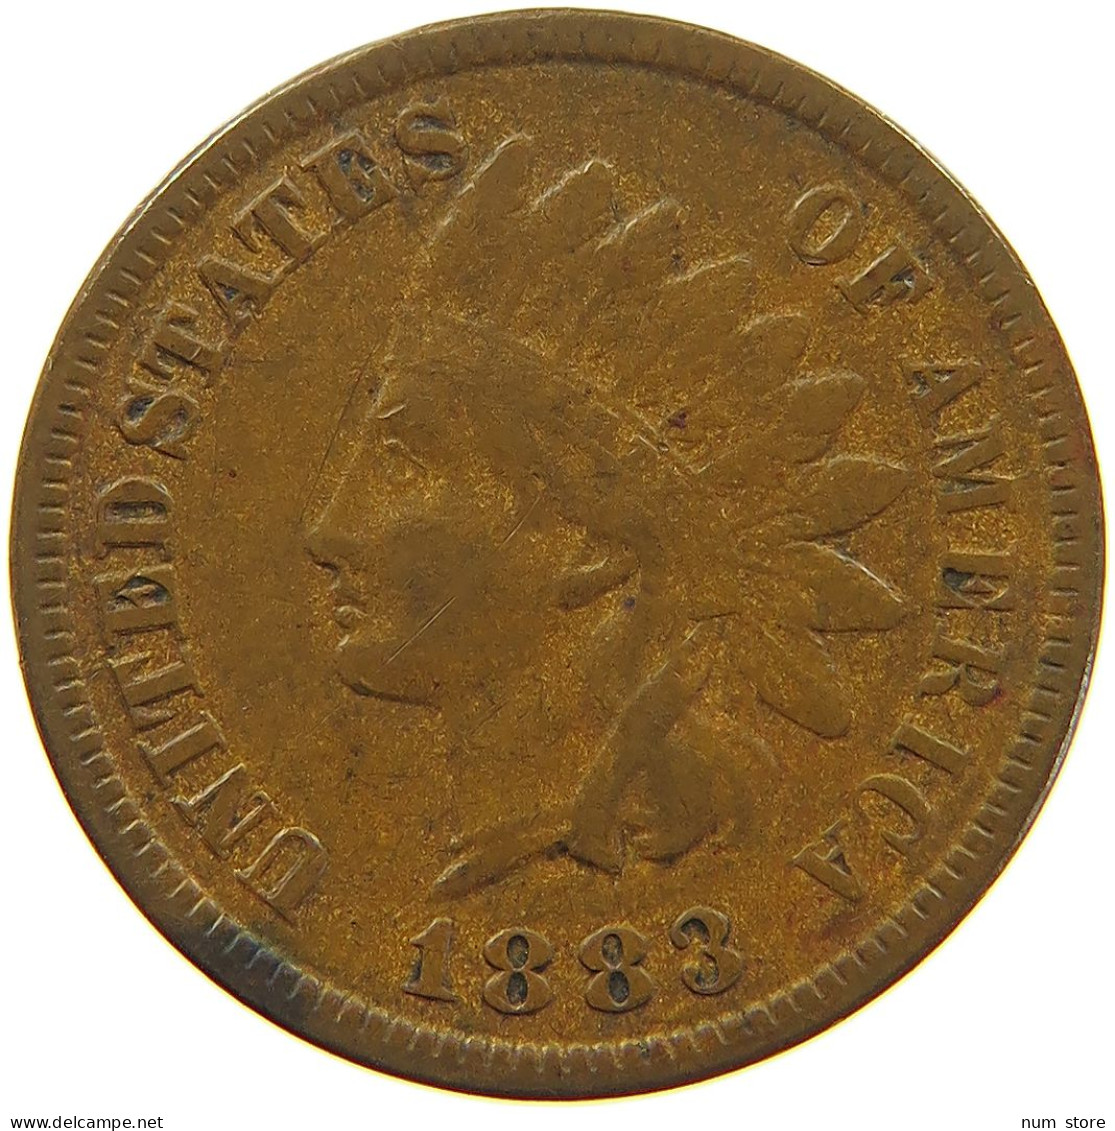 UNITED STATES OF AMERICA CENT 1883 INDIAN HEAD #s019 0189 - 1859-1909: Indian Head